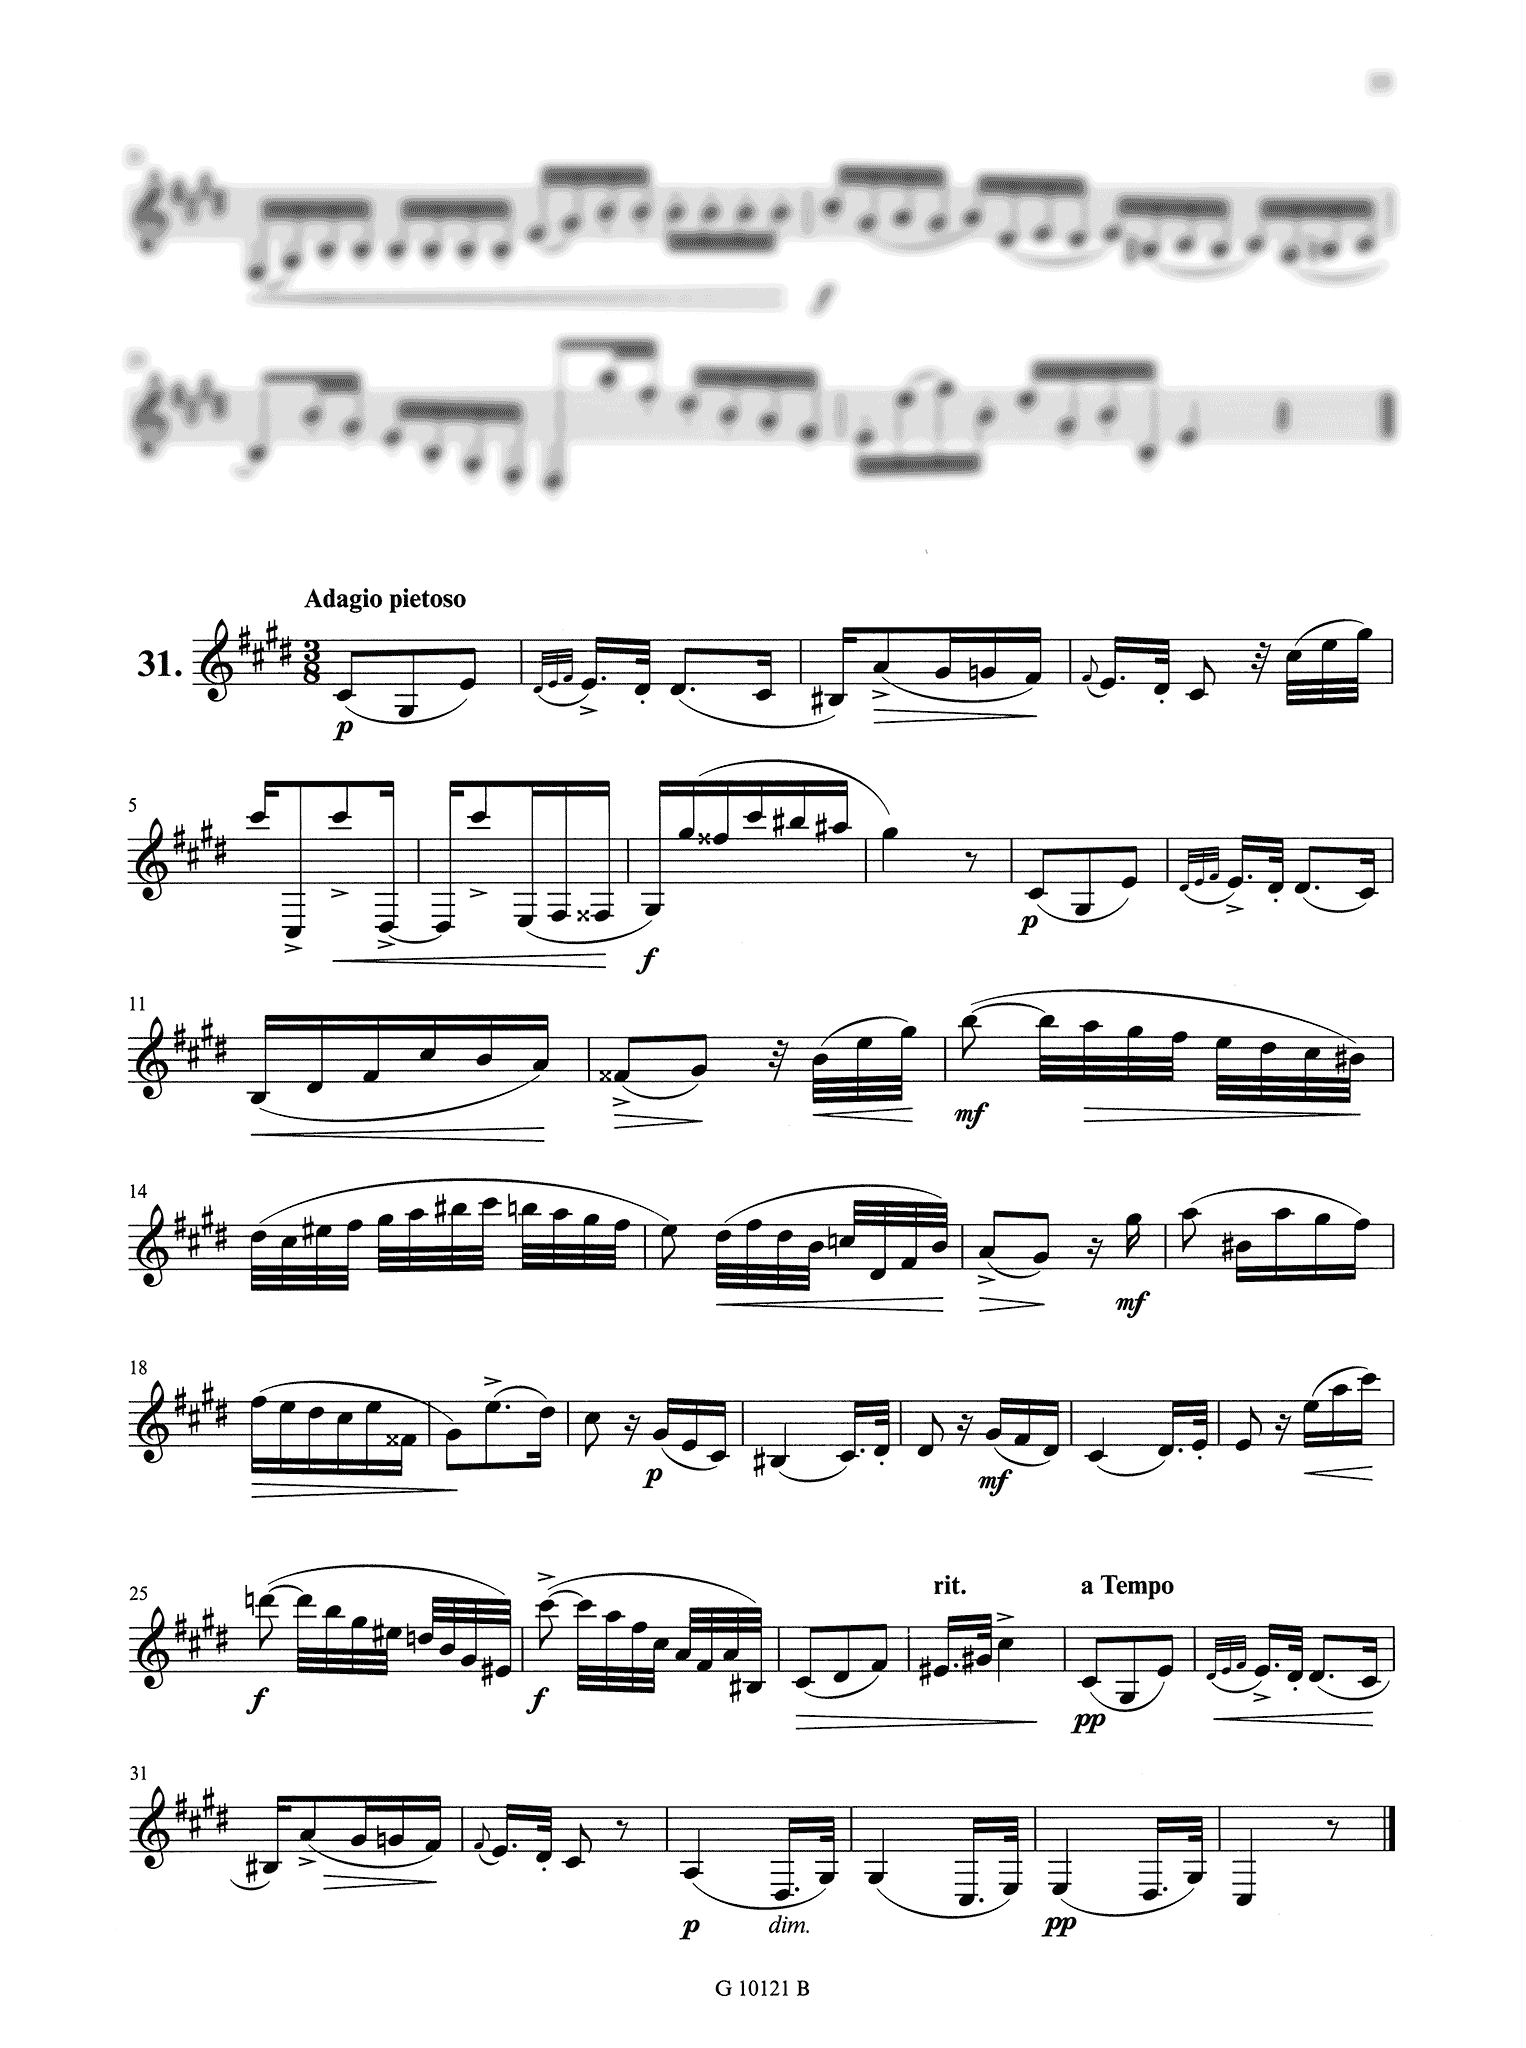 Ferling4 8 Études for low clarinets arranged by Mark Wolbers study no. 31